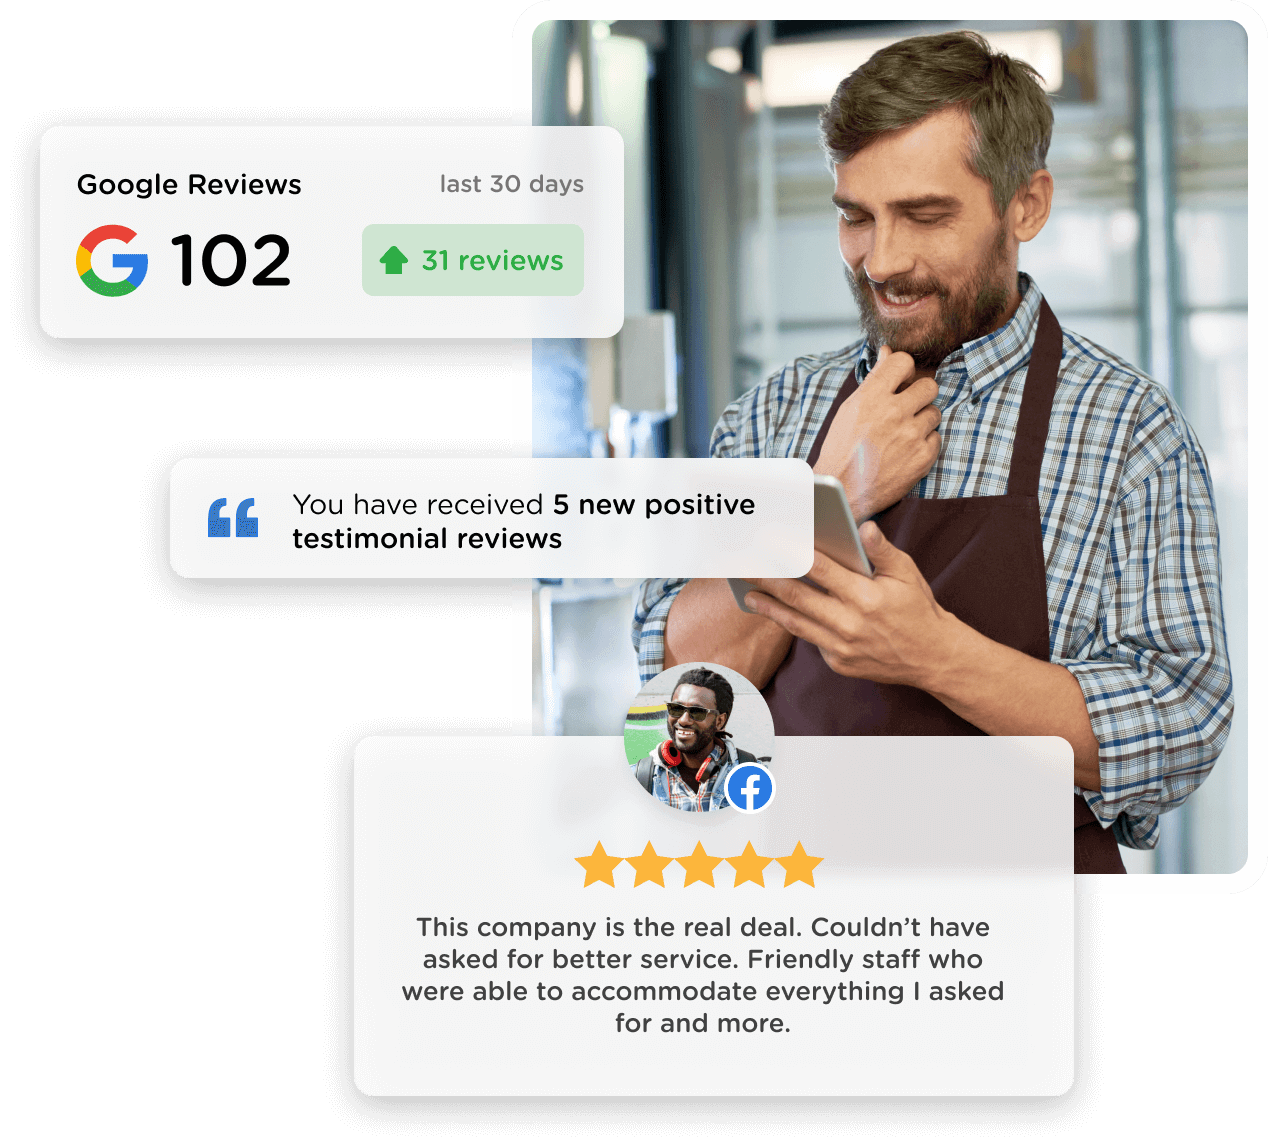 LocalReviews provides you with an easy way to collect customer feedback, including testimonials and Google reviews.